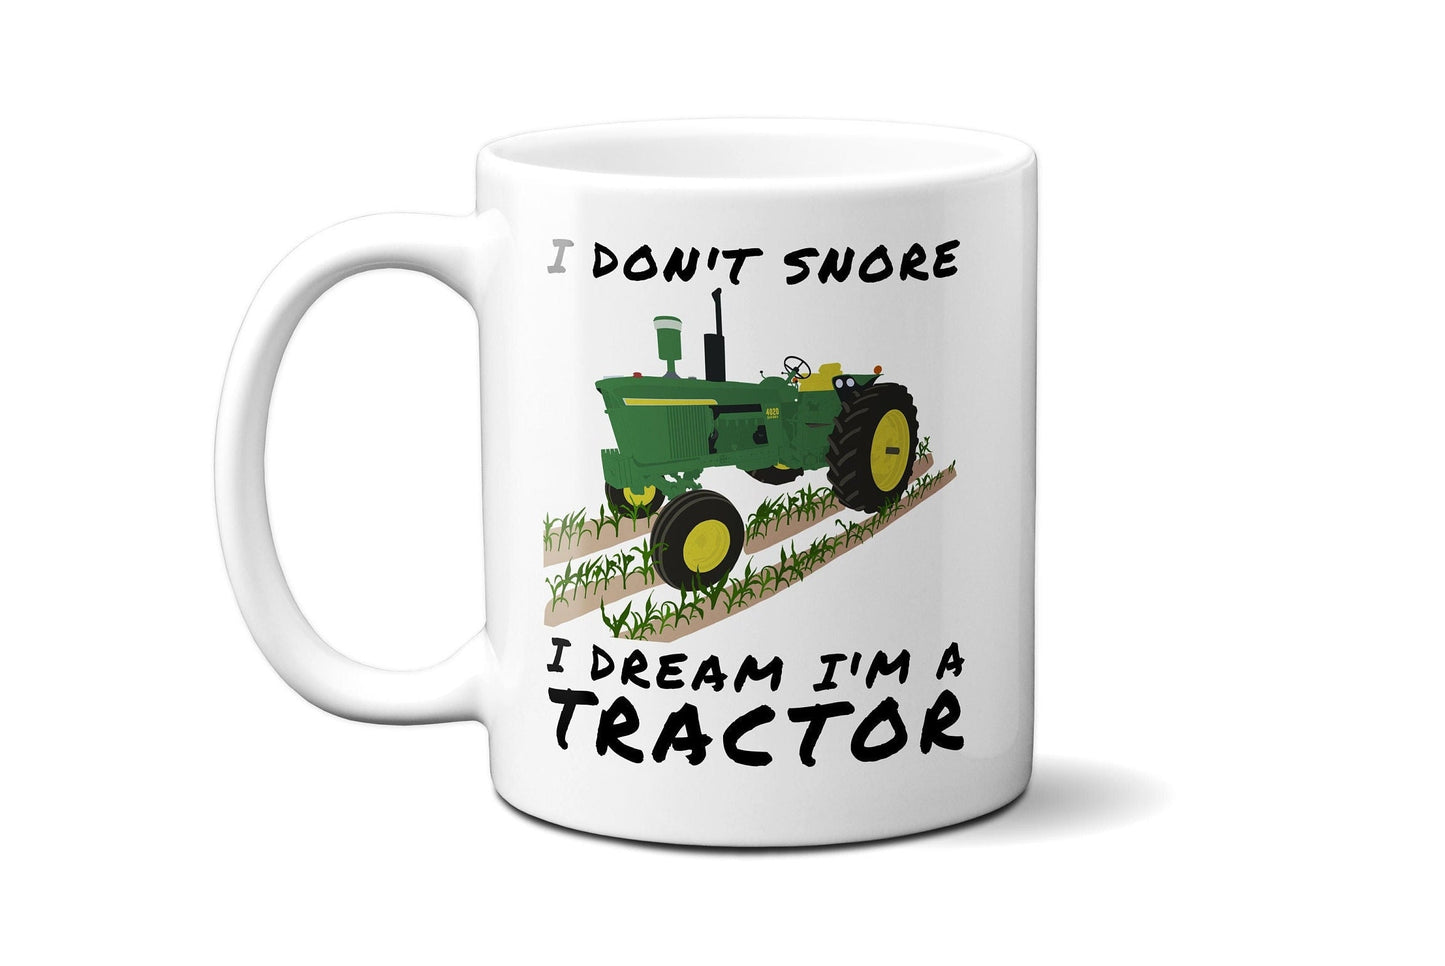 I don't snore I dream I'm a tractor | Funny Farmer | Farmer Gift | John Deere Gift | John Deere Mug | Farmer Christmas Gift | 11 or 15 oz